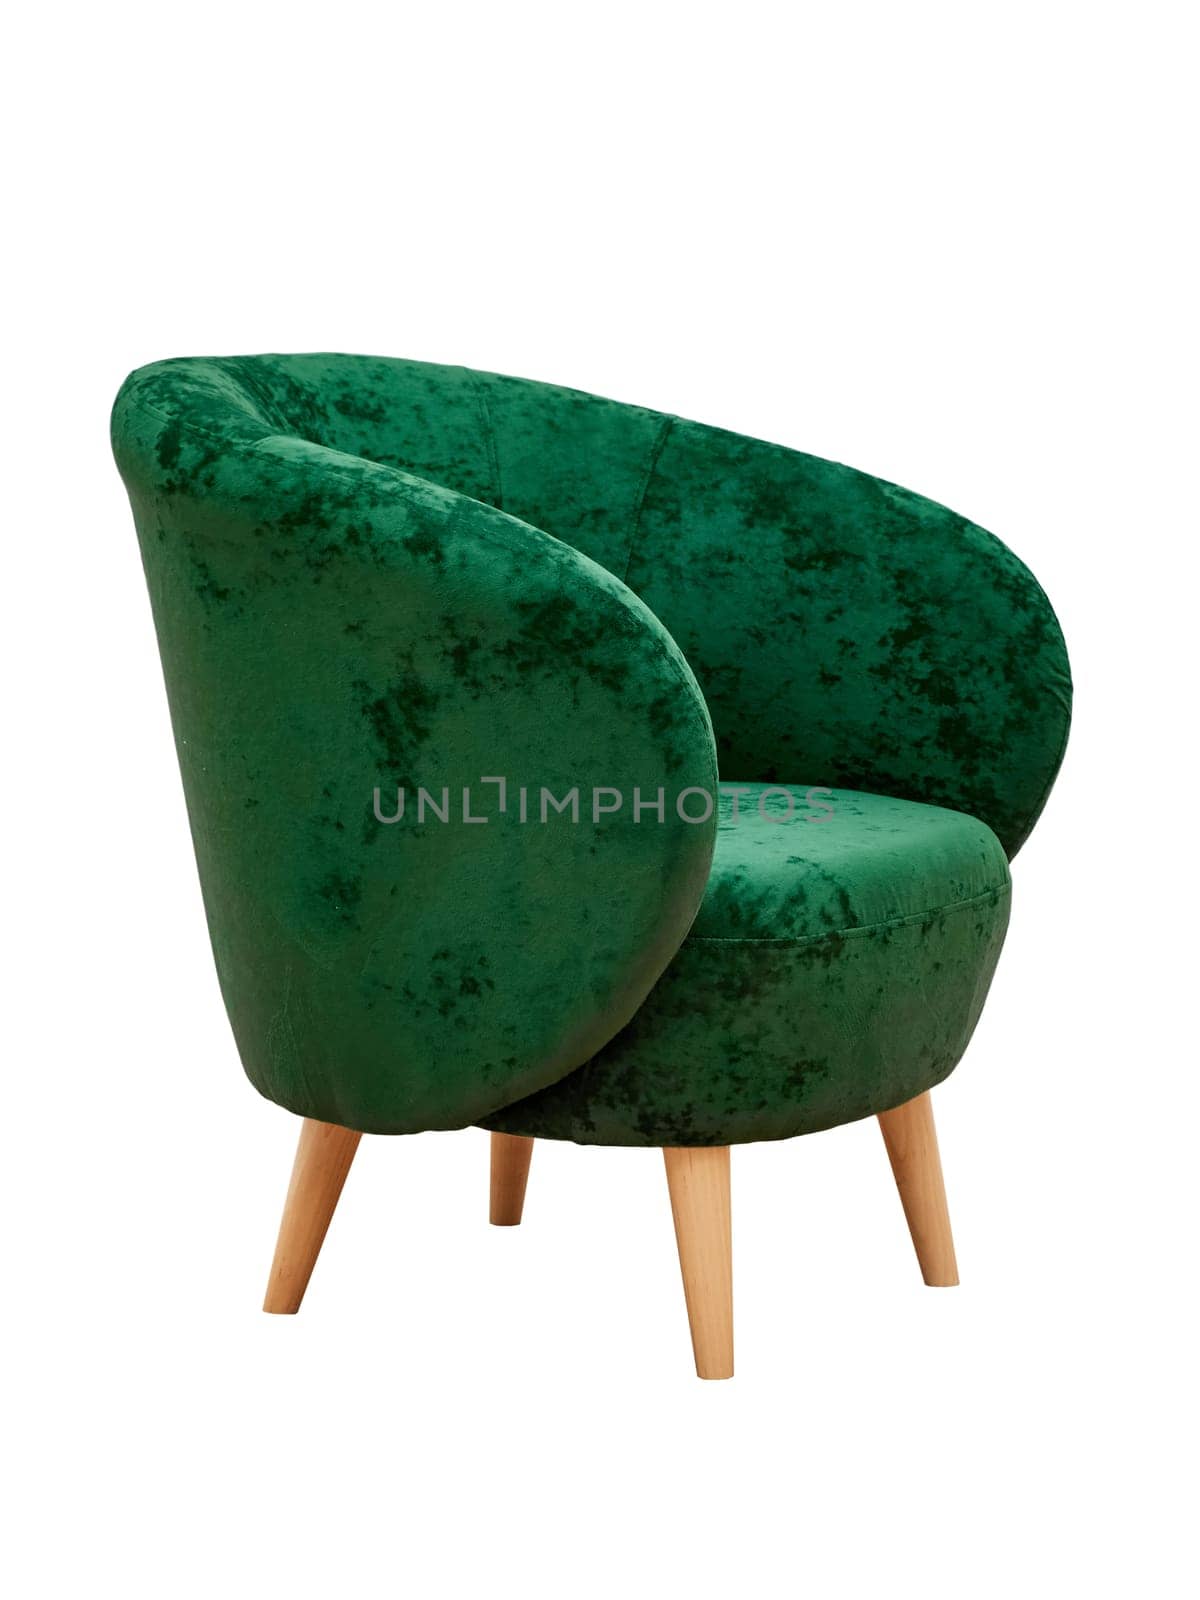 Modern green fabric armchair with wooden legs isolated on white background, side view. furniture, interior, home design in minimal style